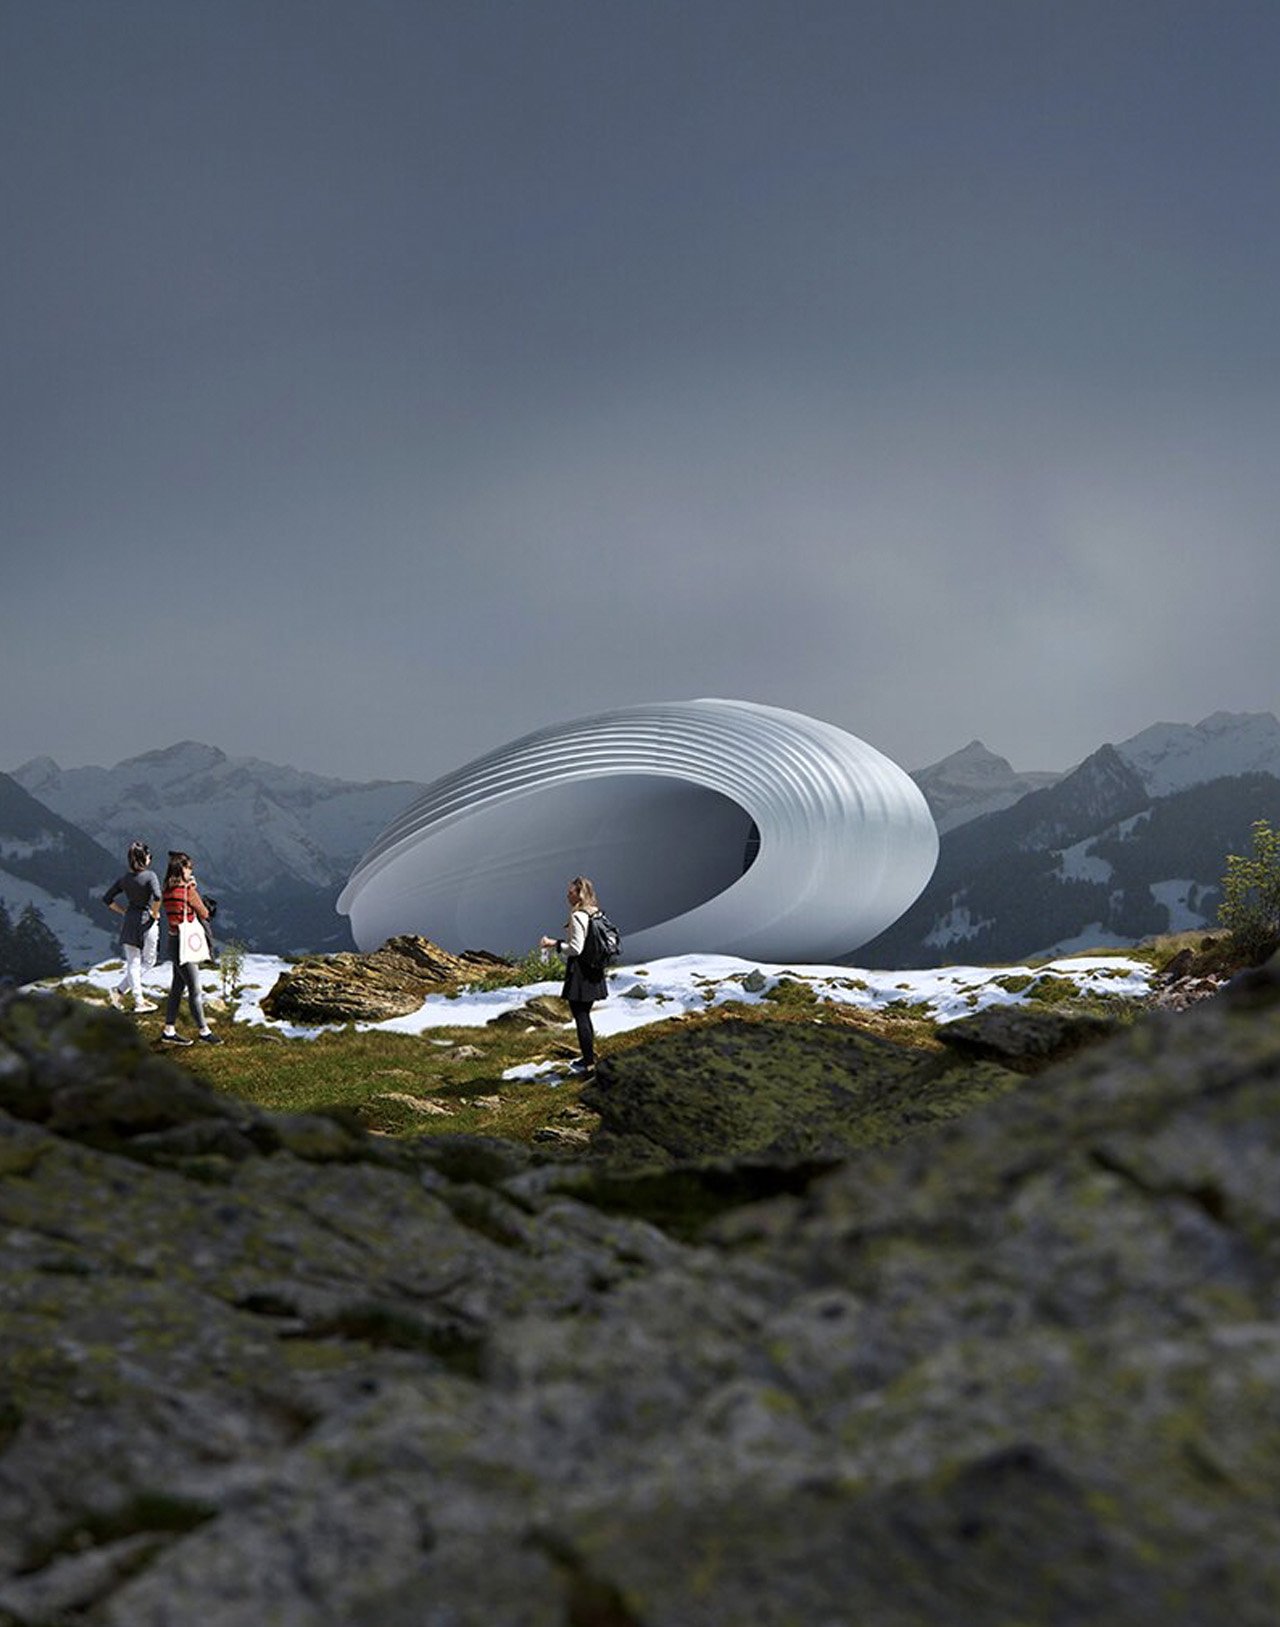 This 3D-printed pavilion is inspired by indigenous shelters & can withstand extreme climates